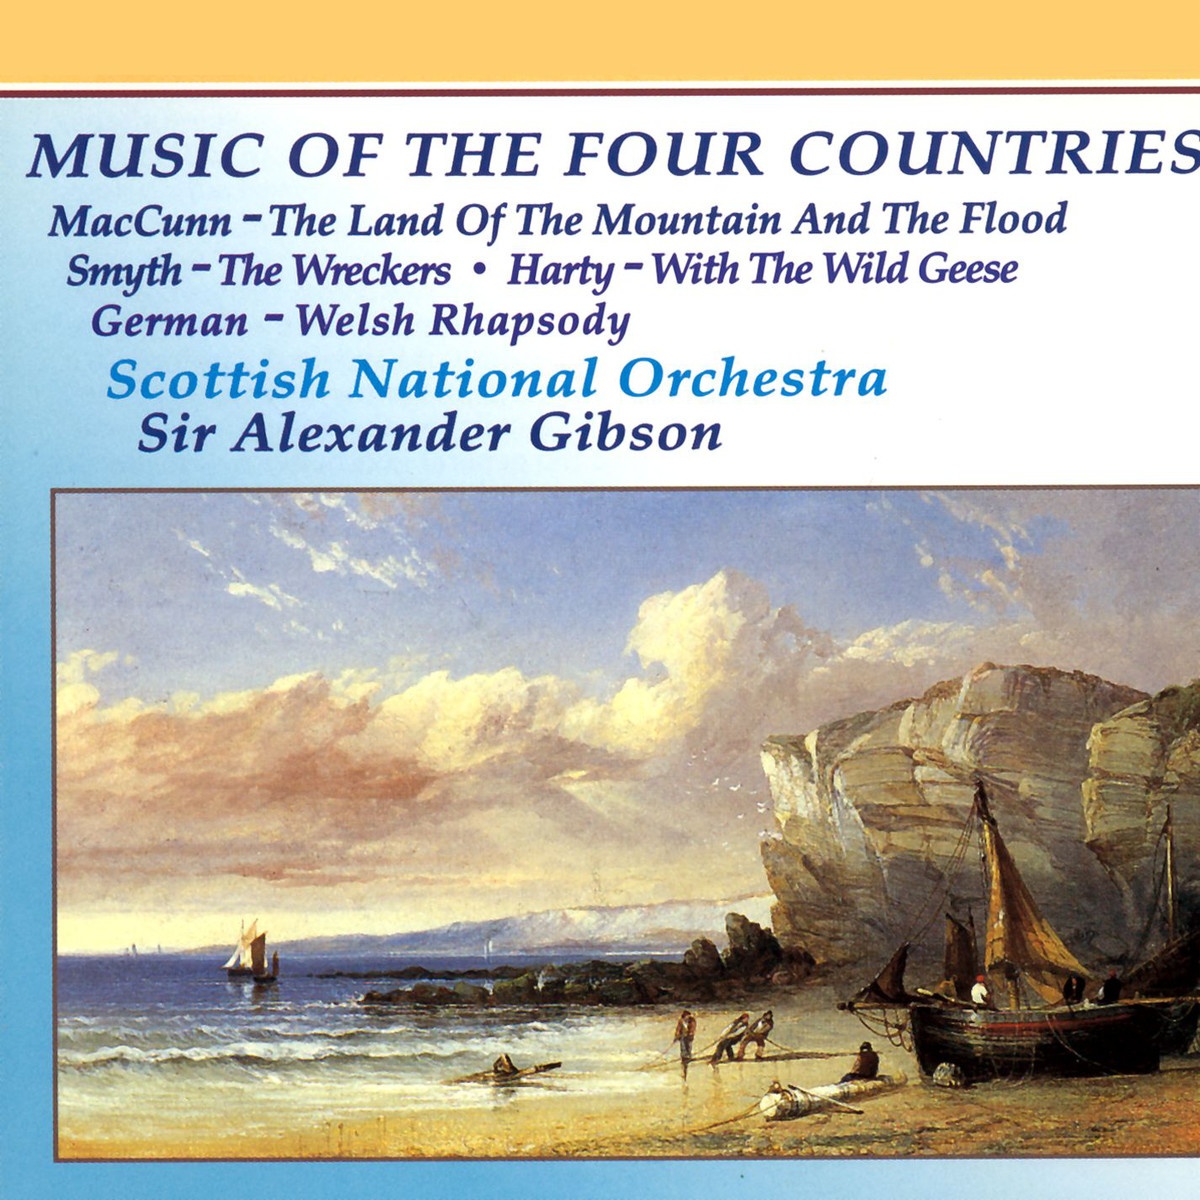 Music of the Four Countries